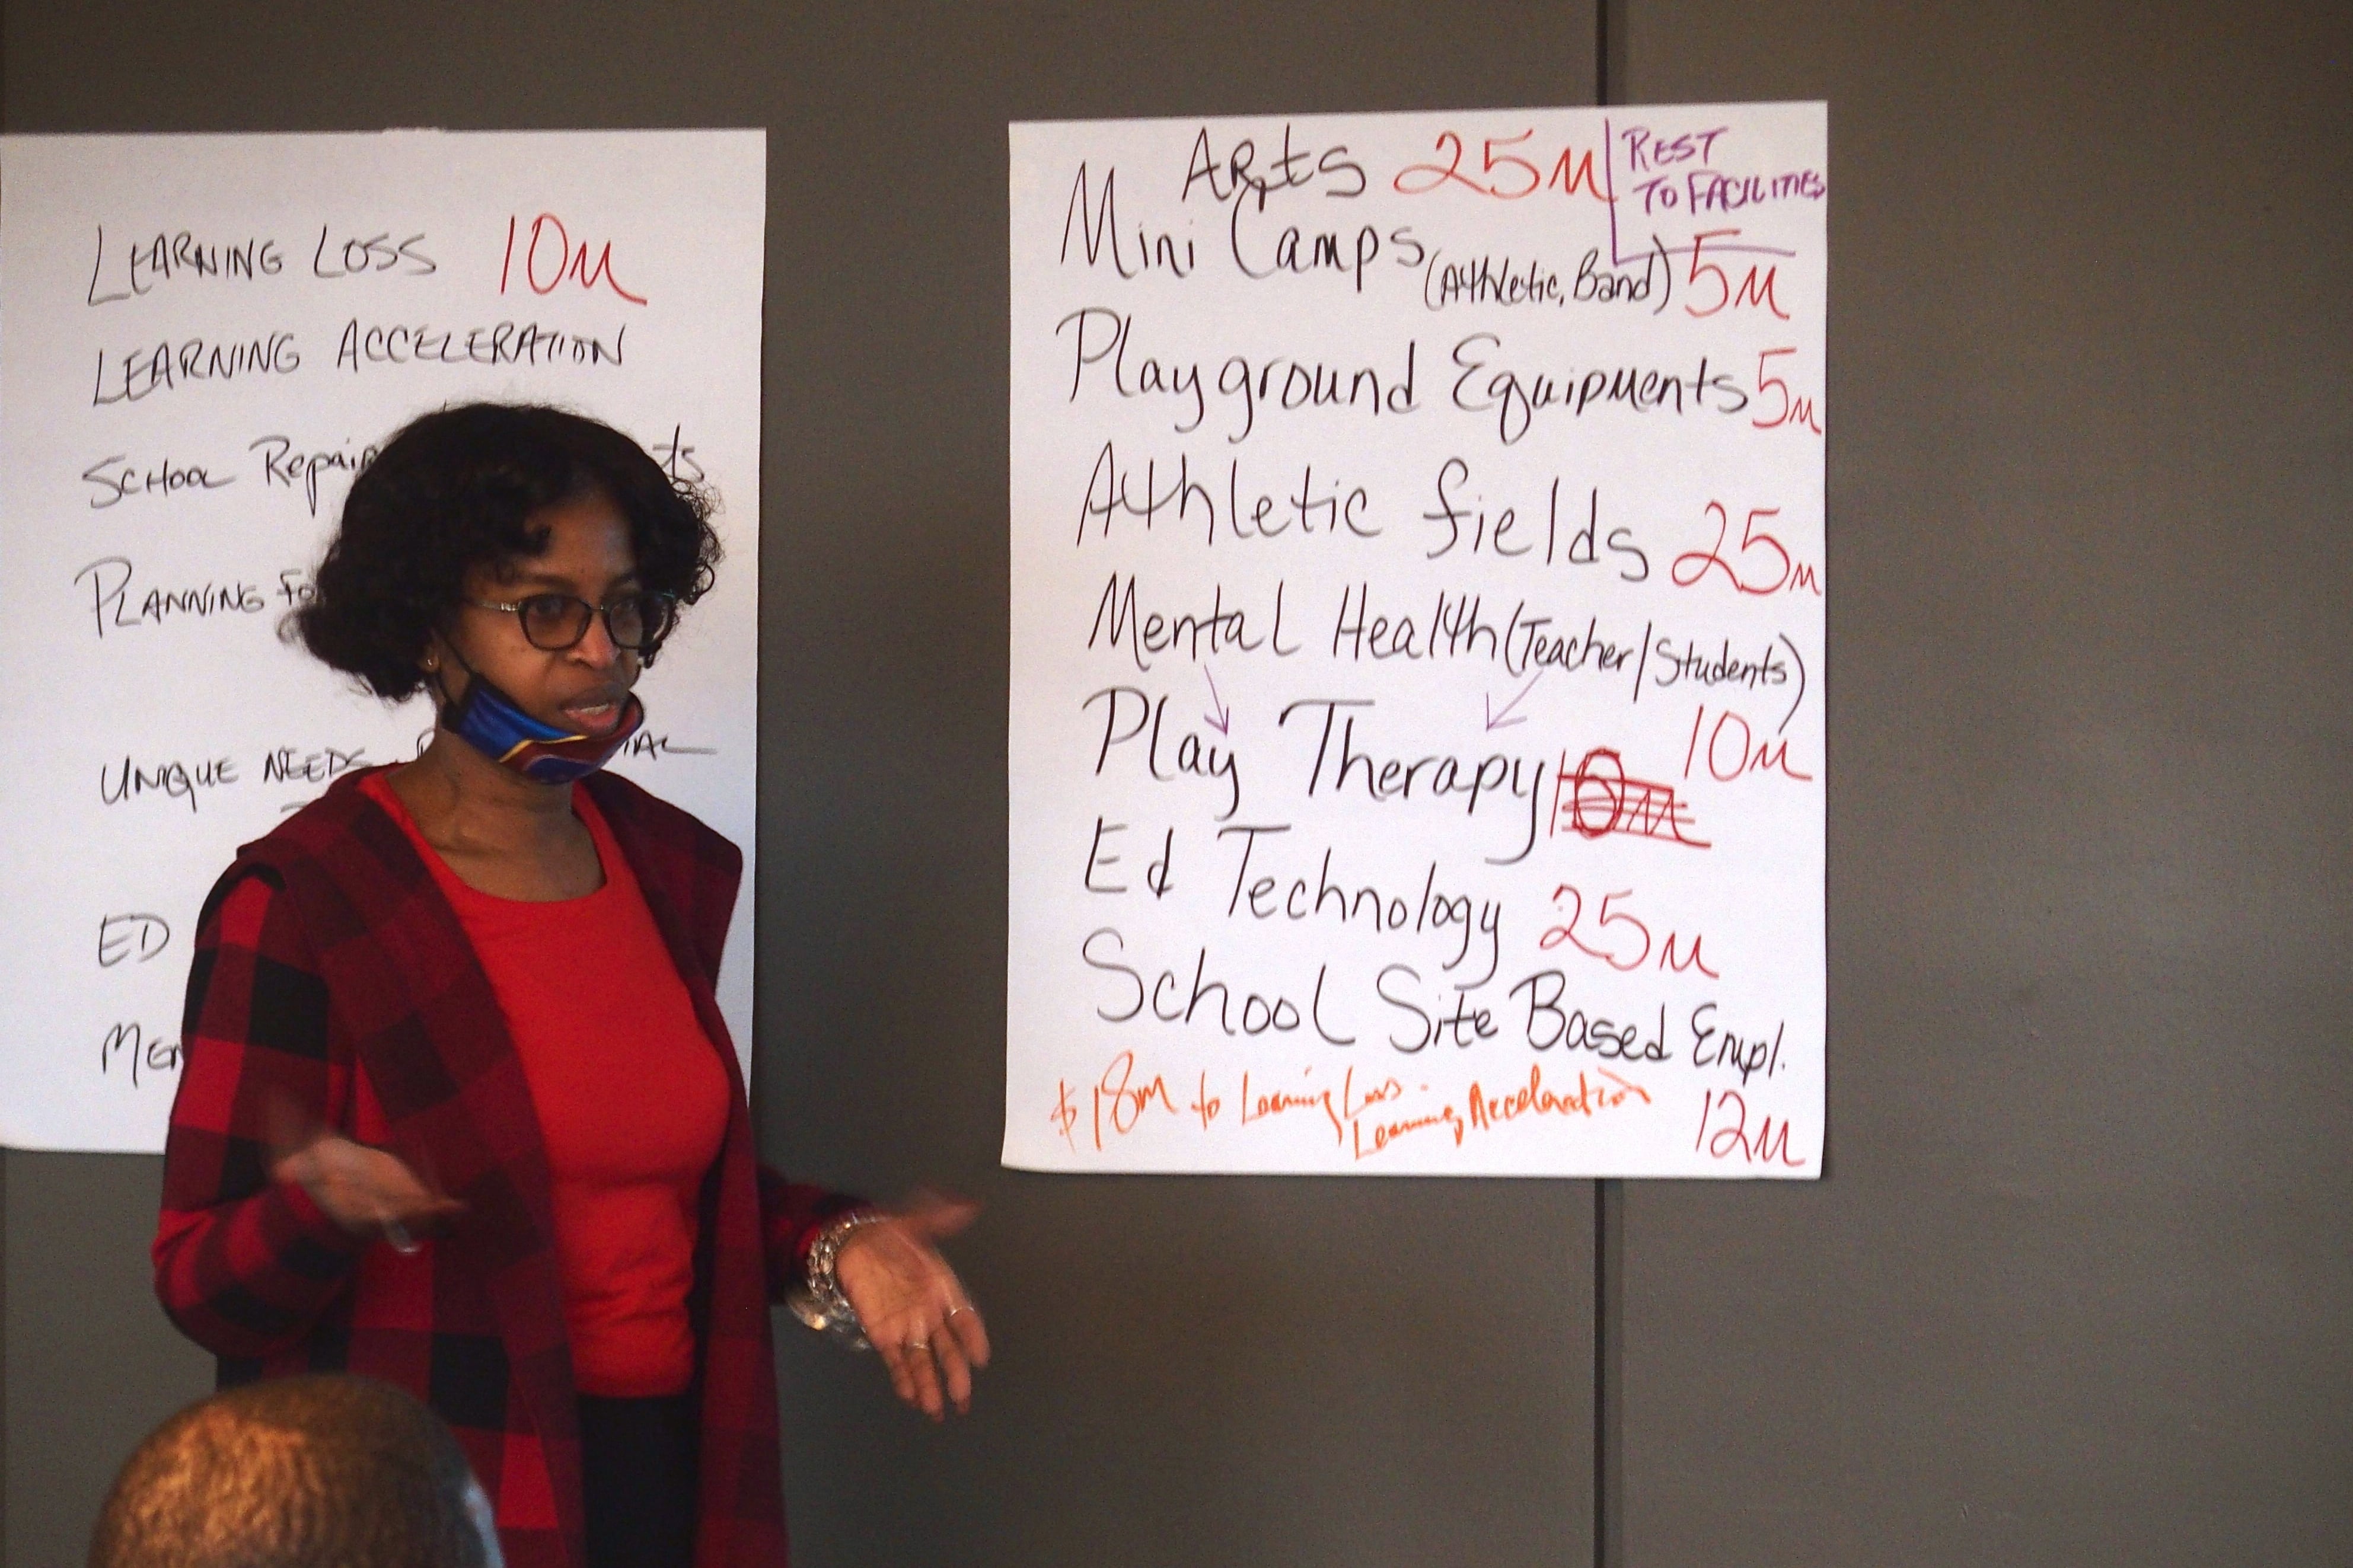 Joyce Dorse-Coleman stands next to a list of ideas posted on the wall and presents to board members and district administration.